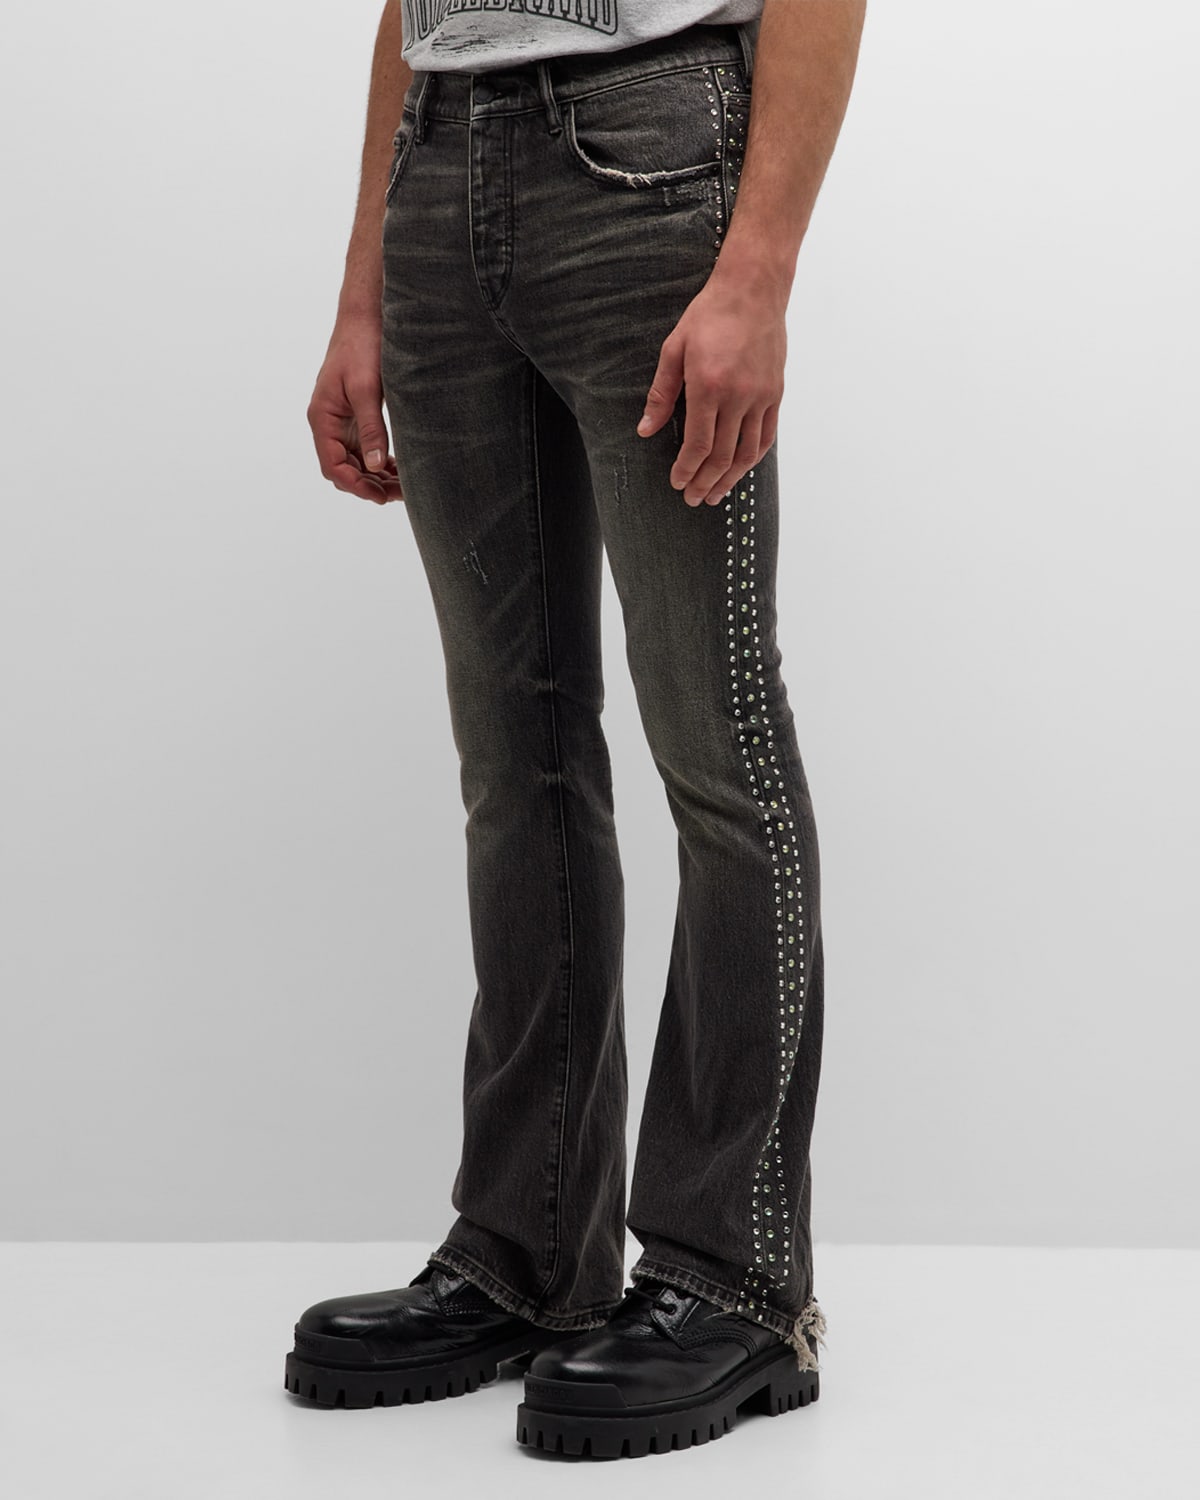 Men's Vintage Flare Jeans with Crystals